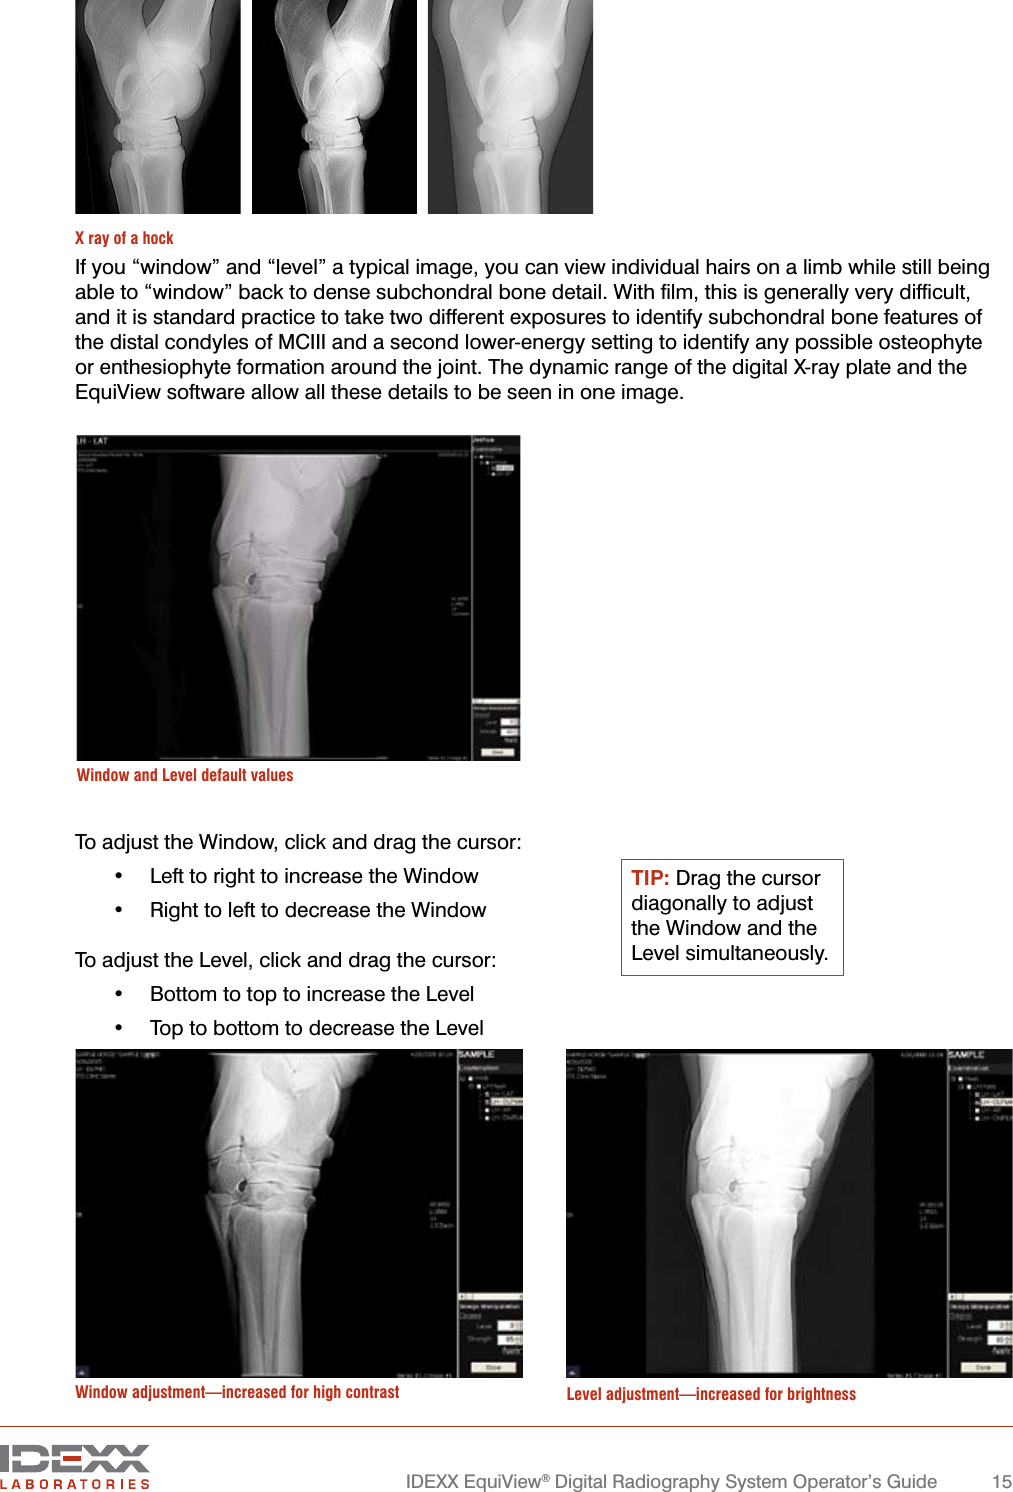   IDEXX EquiView® Digital Radiography System Operator’s Guide  15If you “window” and “level” a typical image, you can view individual hairs on a limb while still being able to “window” back to dense subchondral bone detail. With ﬁlm, this is generally very difﬁcult, and it is standard practice to take two different exposures to identify subchondral bone features of the distal condyles of MCIII and a second lower-energy setting to identify any possible osteophyte or enthesiophyte formation around the joint. The dynamic range of the digital X-ray plate and the EquiView software allow all these details to be seen in one image.To adjust the Window, click and drag the cursor:•  Left to right to increase the Window •  Right to left to decrease the WindowTo adjust the Level, click and drag the cursor:•  Bottom to top to increase the Level •  Top to bottom to decrease the Level Window and Level default valuesWindow adjustment—increased for high contrast Level adjustment—increased for brightnessX ray of a hockTIP: Drag the cursor diagonally to adjust the Window and the Level simultaneously.